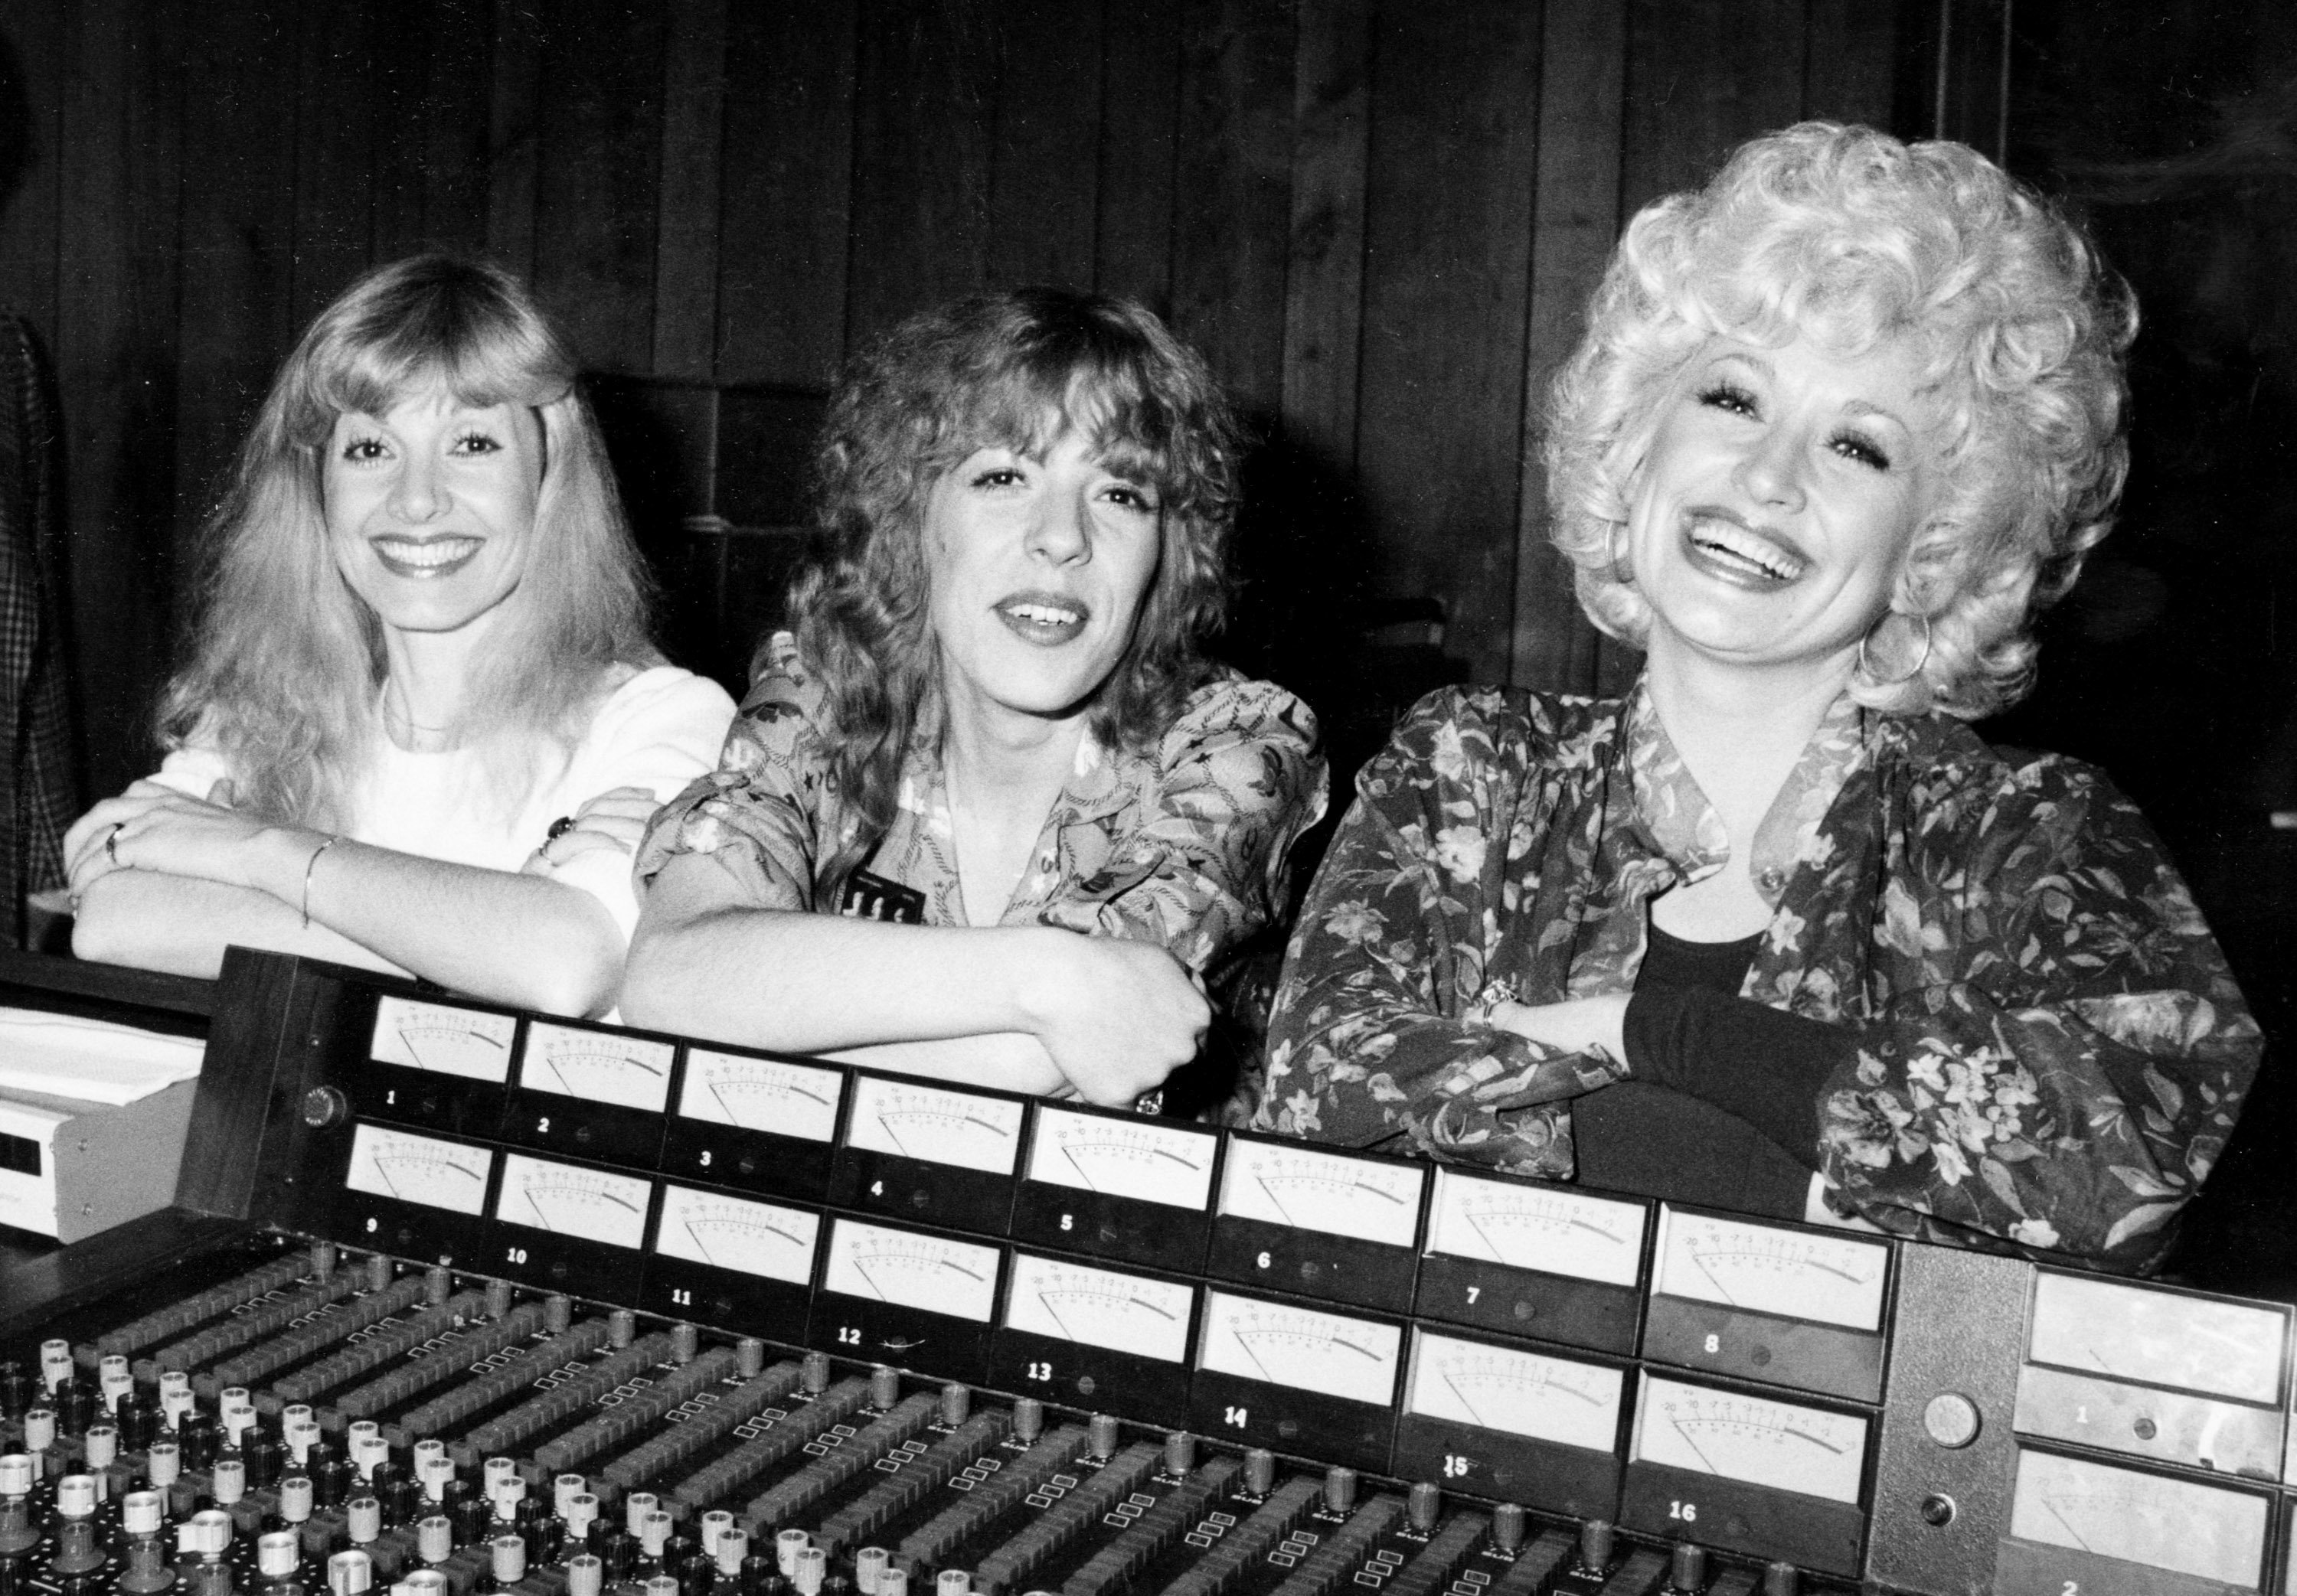 Stella Parton, Frieda Parton, and Dolly Parton during Recording Frieda Parton's album on January 15, 1981 at Bearsville Studios in Hollywood, CA, United States.